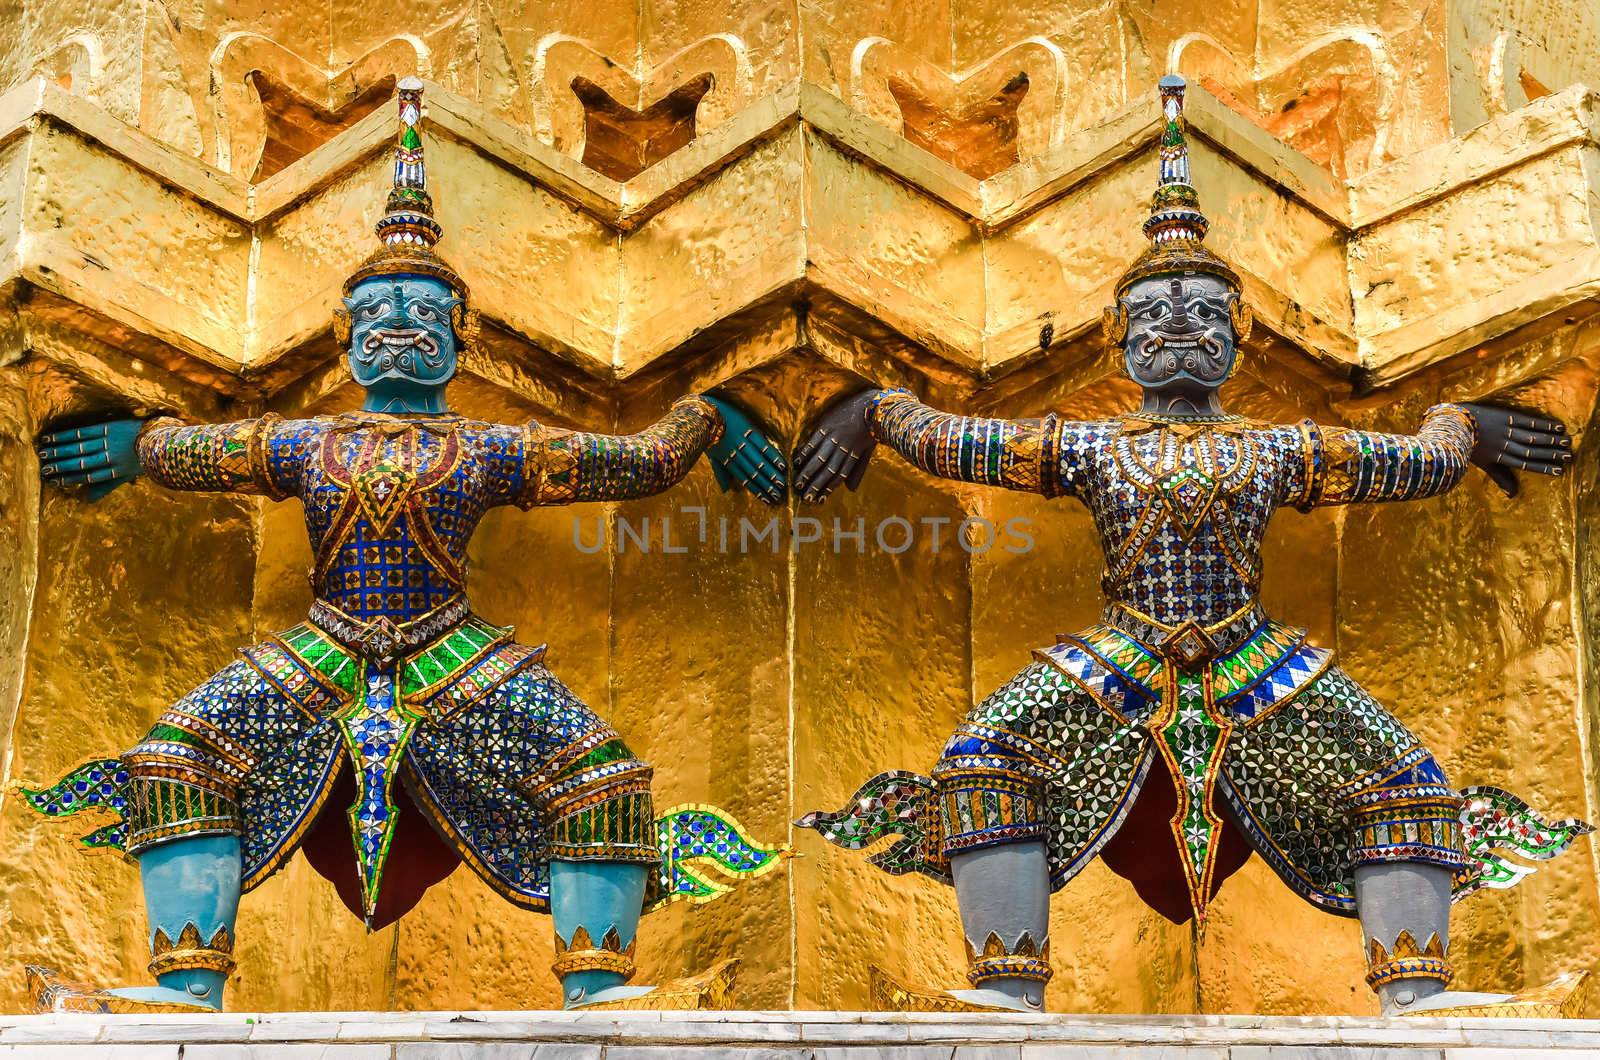 Detail of statues in Grand palace temple, Bangkok, Thailand